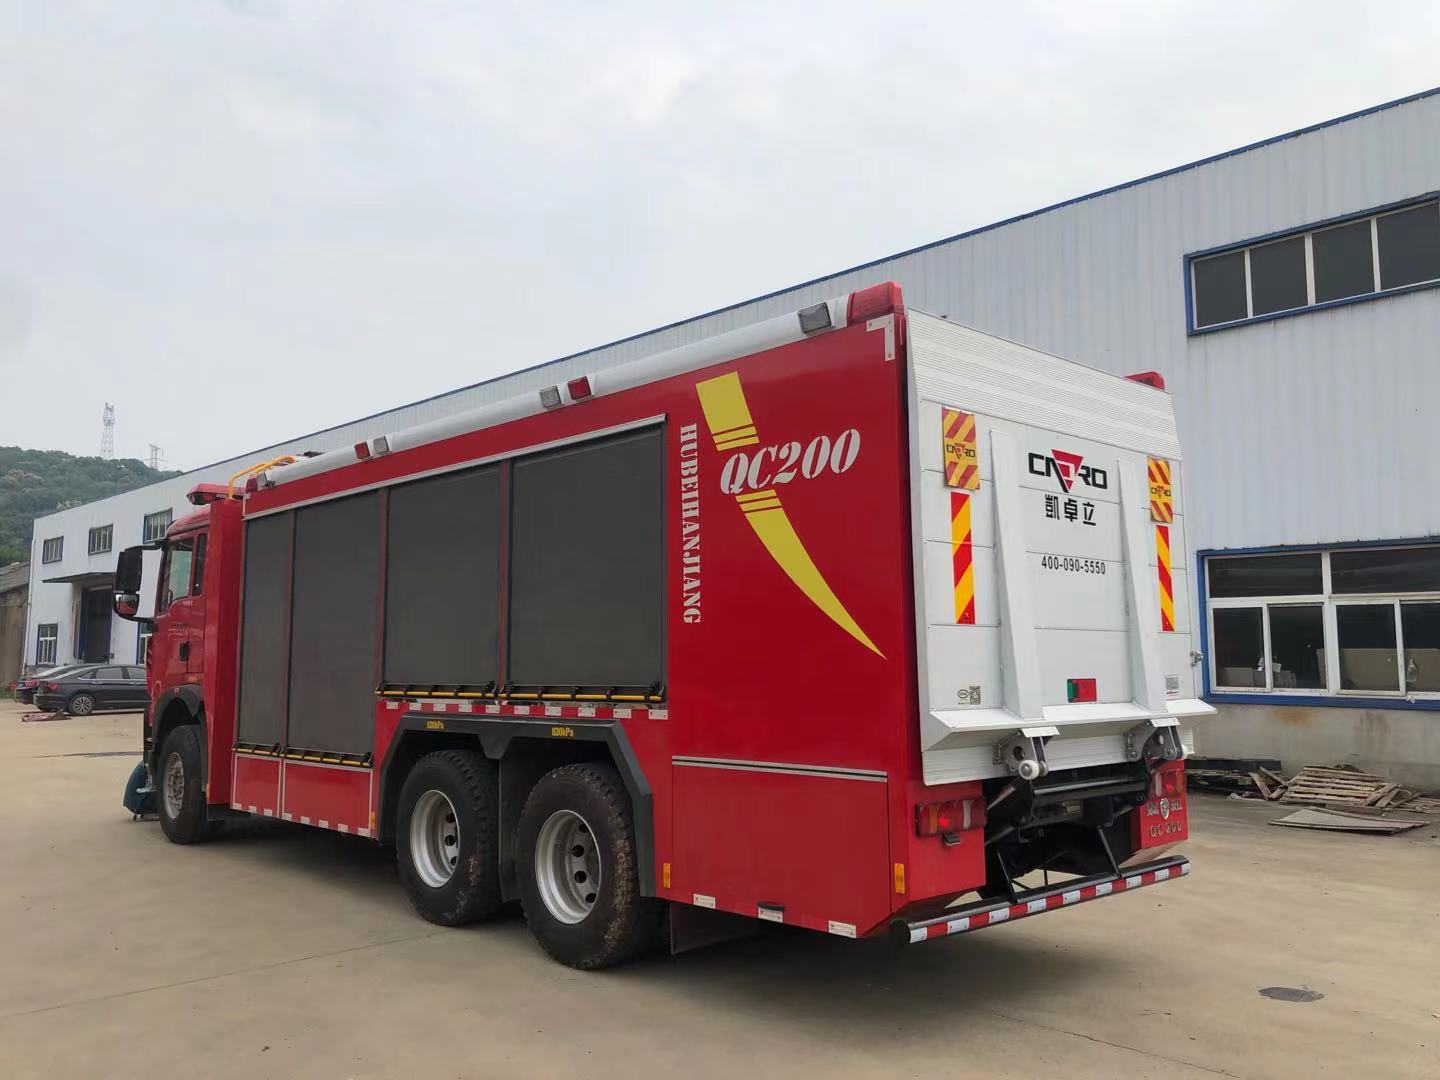 The choice of fire truck chassis